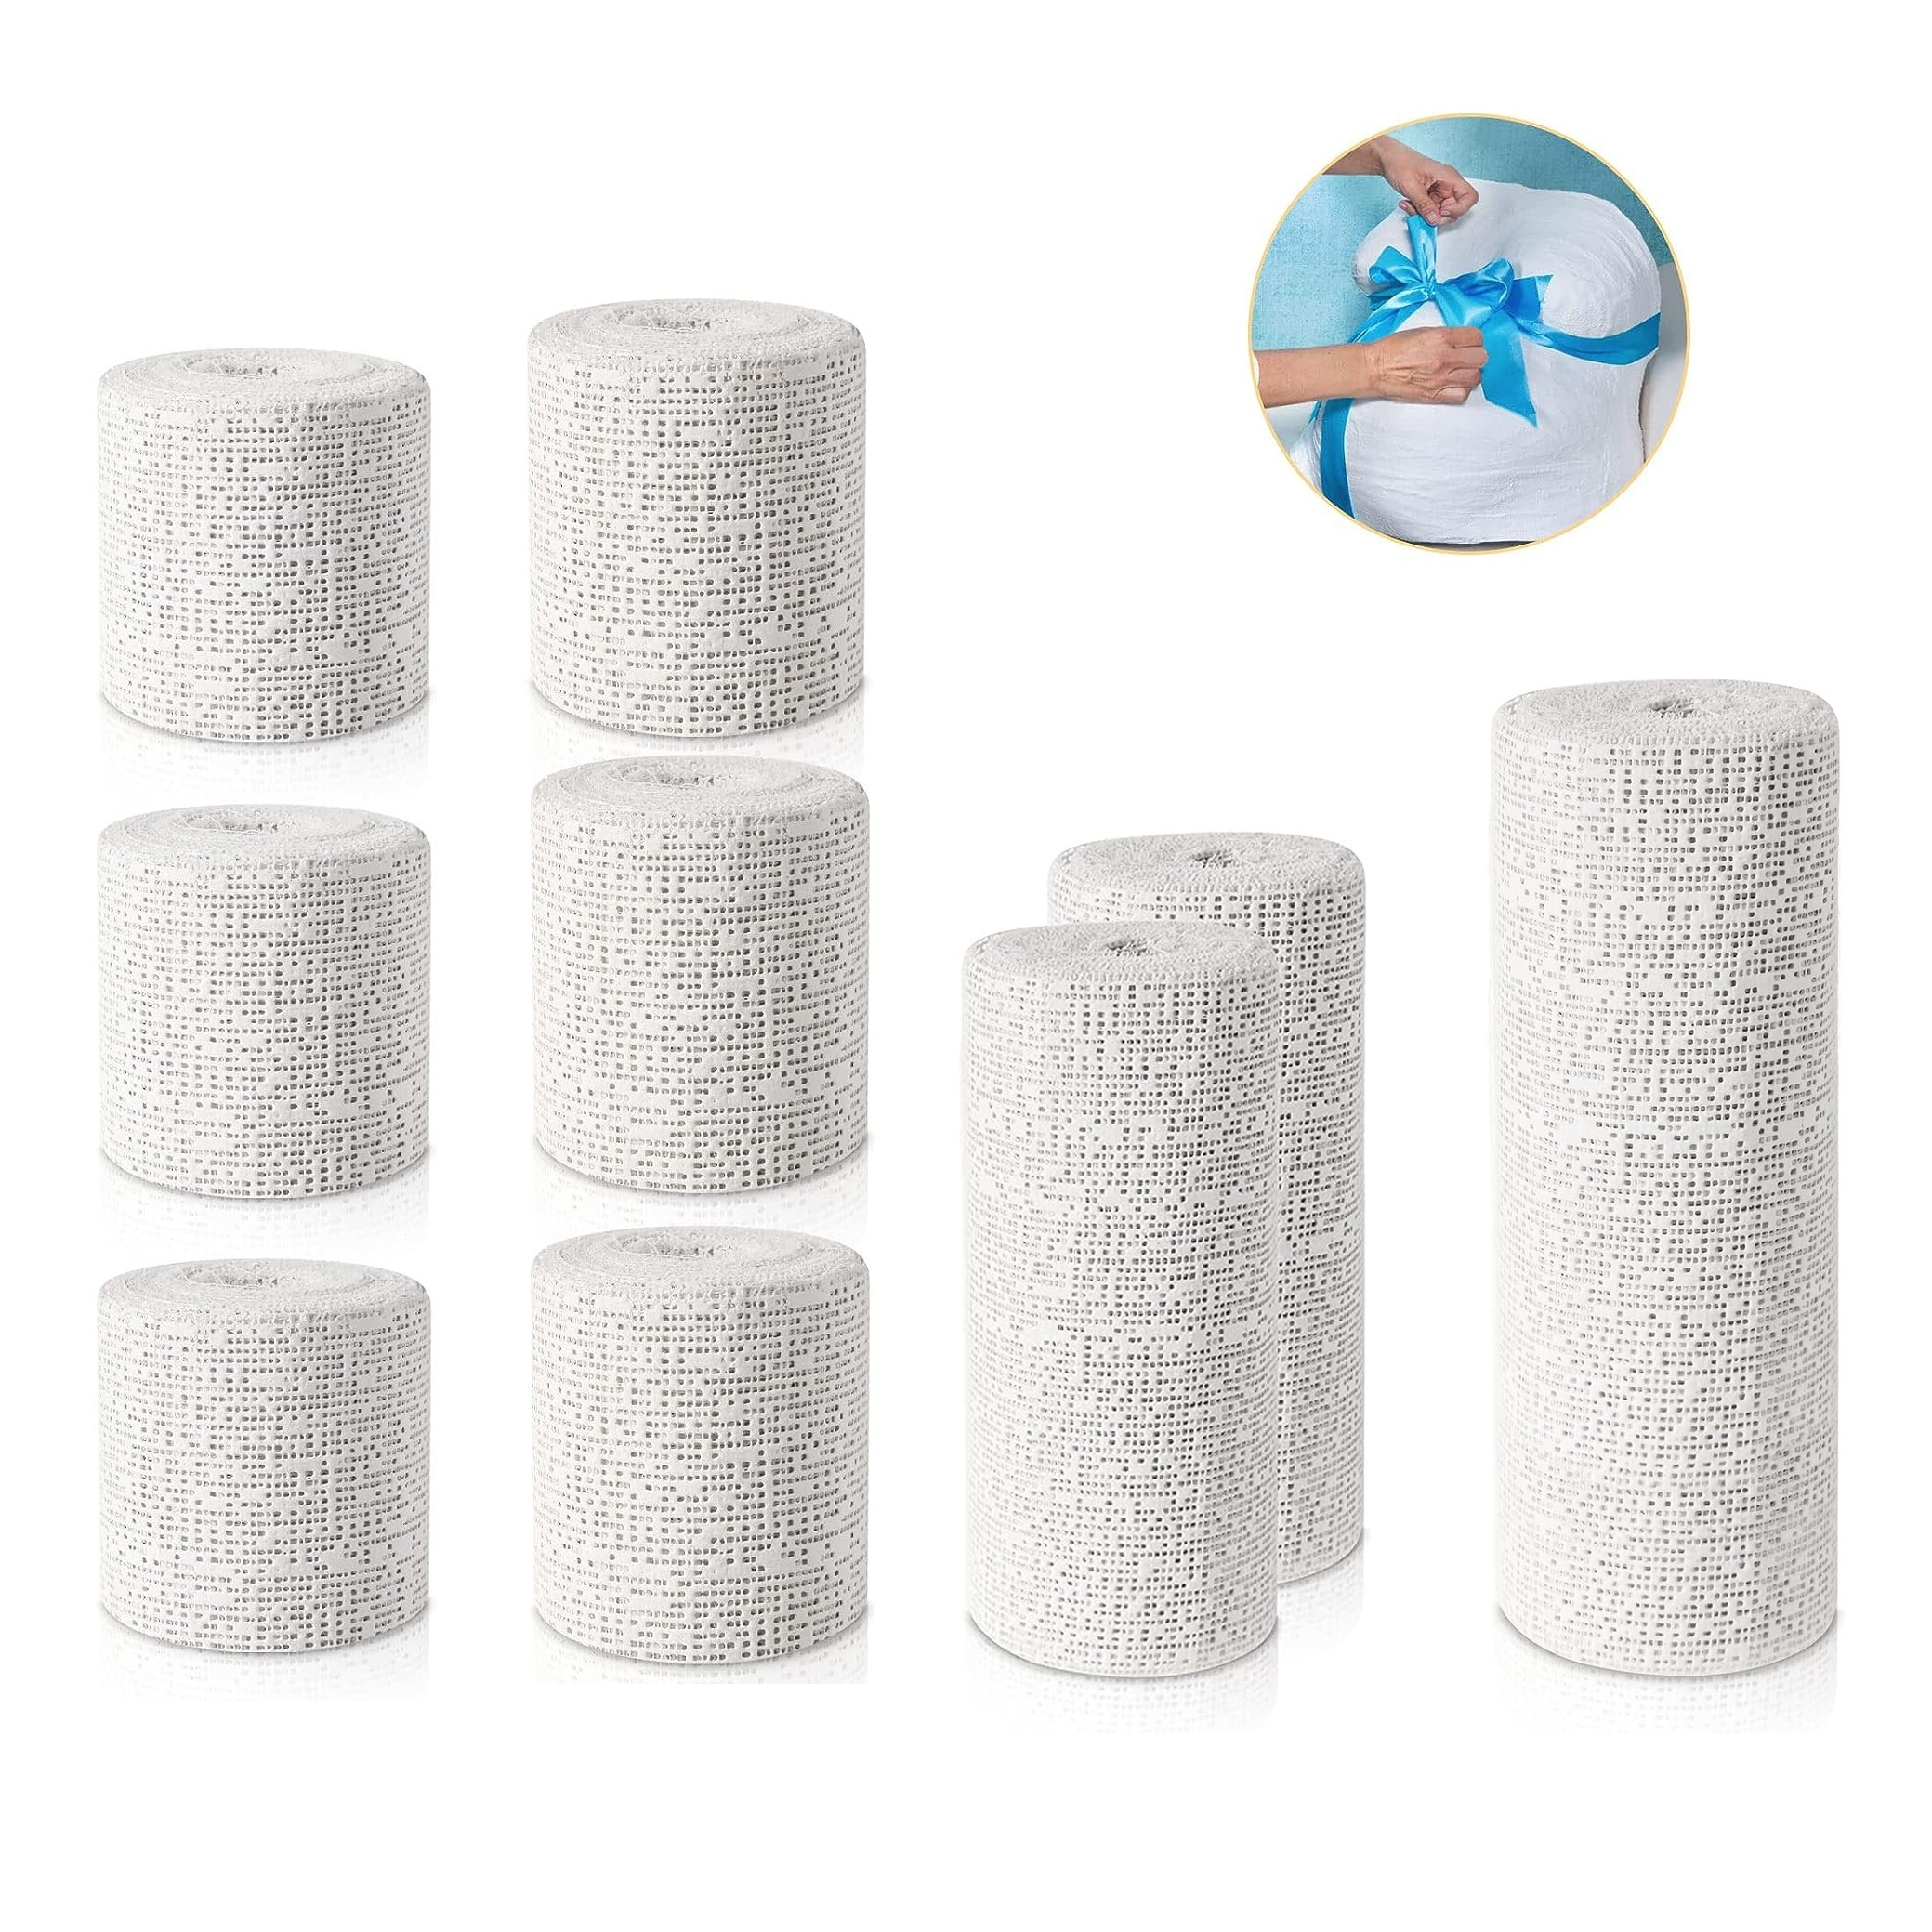 6 Inch X 5 Yards (12 Rolls) OrthoTape Plaster Cloth Gauze Bandages Rolls  for Art Project, Belly Cast, Mask Making, Sculptures, Body Casts, Craft